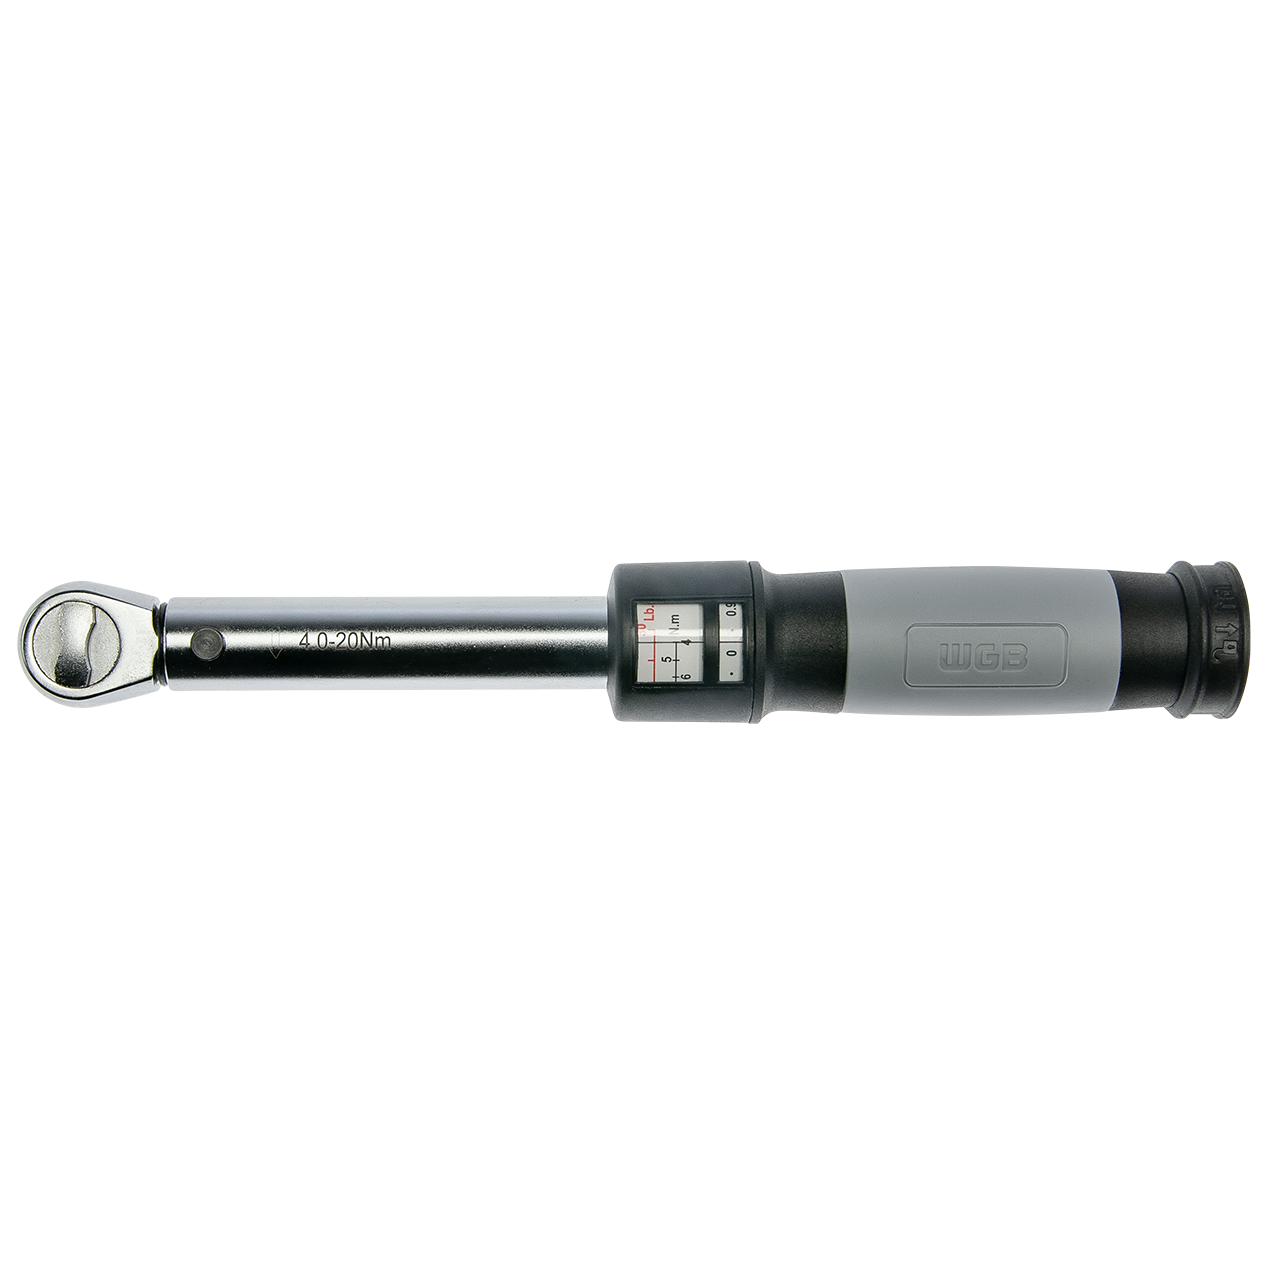 1/4" Automatic Torque Wrench